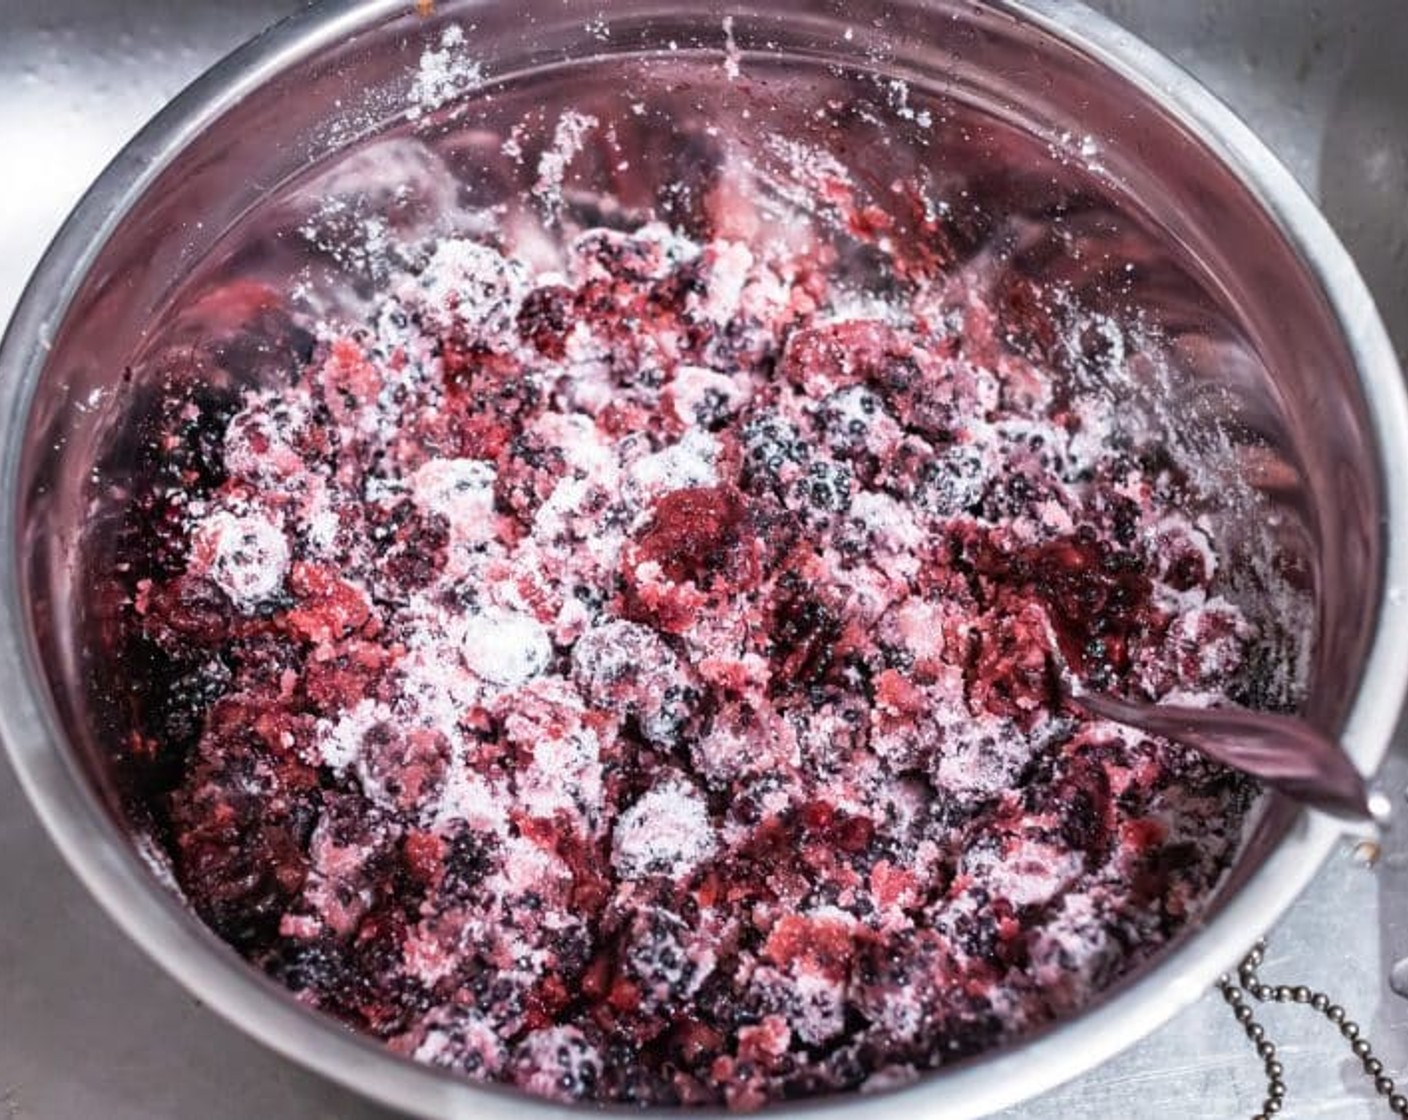 step 1 Add Fresh Blackberries (7 cups), 1 Tbsp of Lemon (1), and Caster Sugar (4 1/2 cups) to a large saucepan, mix well. Cover and leave the fruit at room temperature overnight.